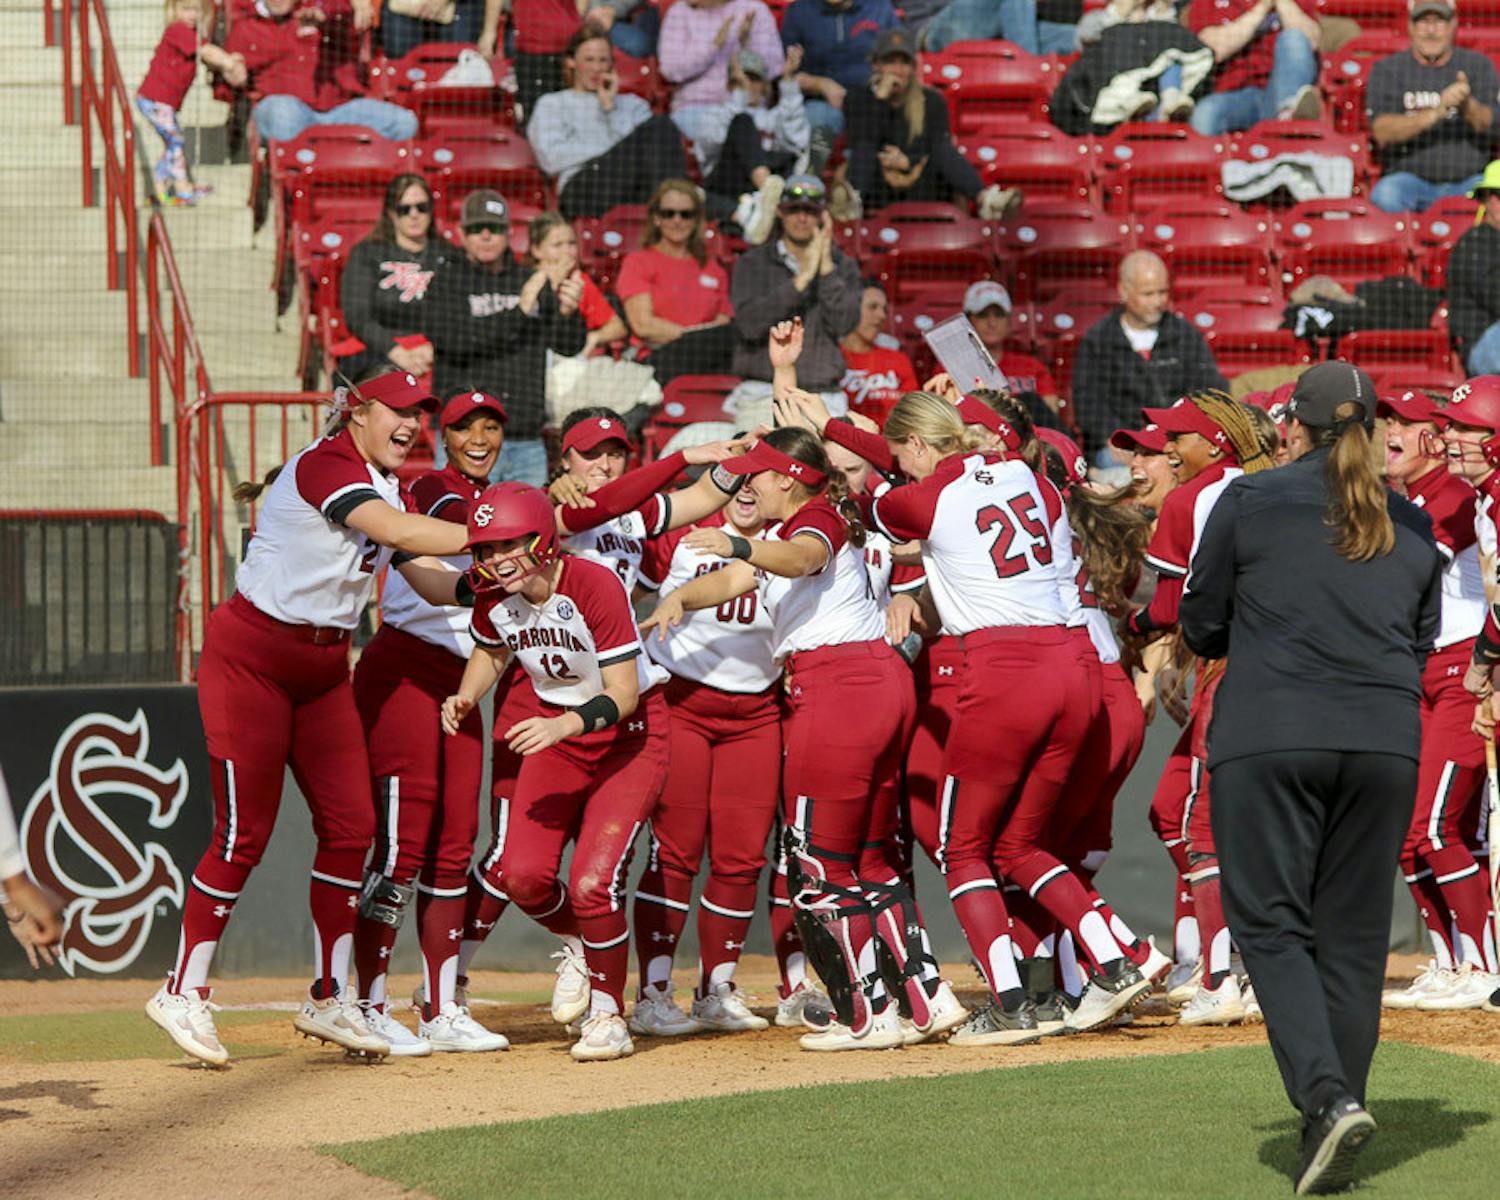 The Gamecock softball team winded up the weekend winning the last three games of the Carolina Classic, beating George Washington, Western Kentucky and Campbell. The Gamecocks had the largest lead against Western Kentucky, with sophomore outfielder Marissa Gonzalez hitting a grand slam and fifth-year outfielder Haley Simpson hitting an additional home run in the second inning. South Carolina found itself struggling to make much headway against Campbell, only beating it 2-1.